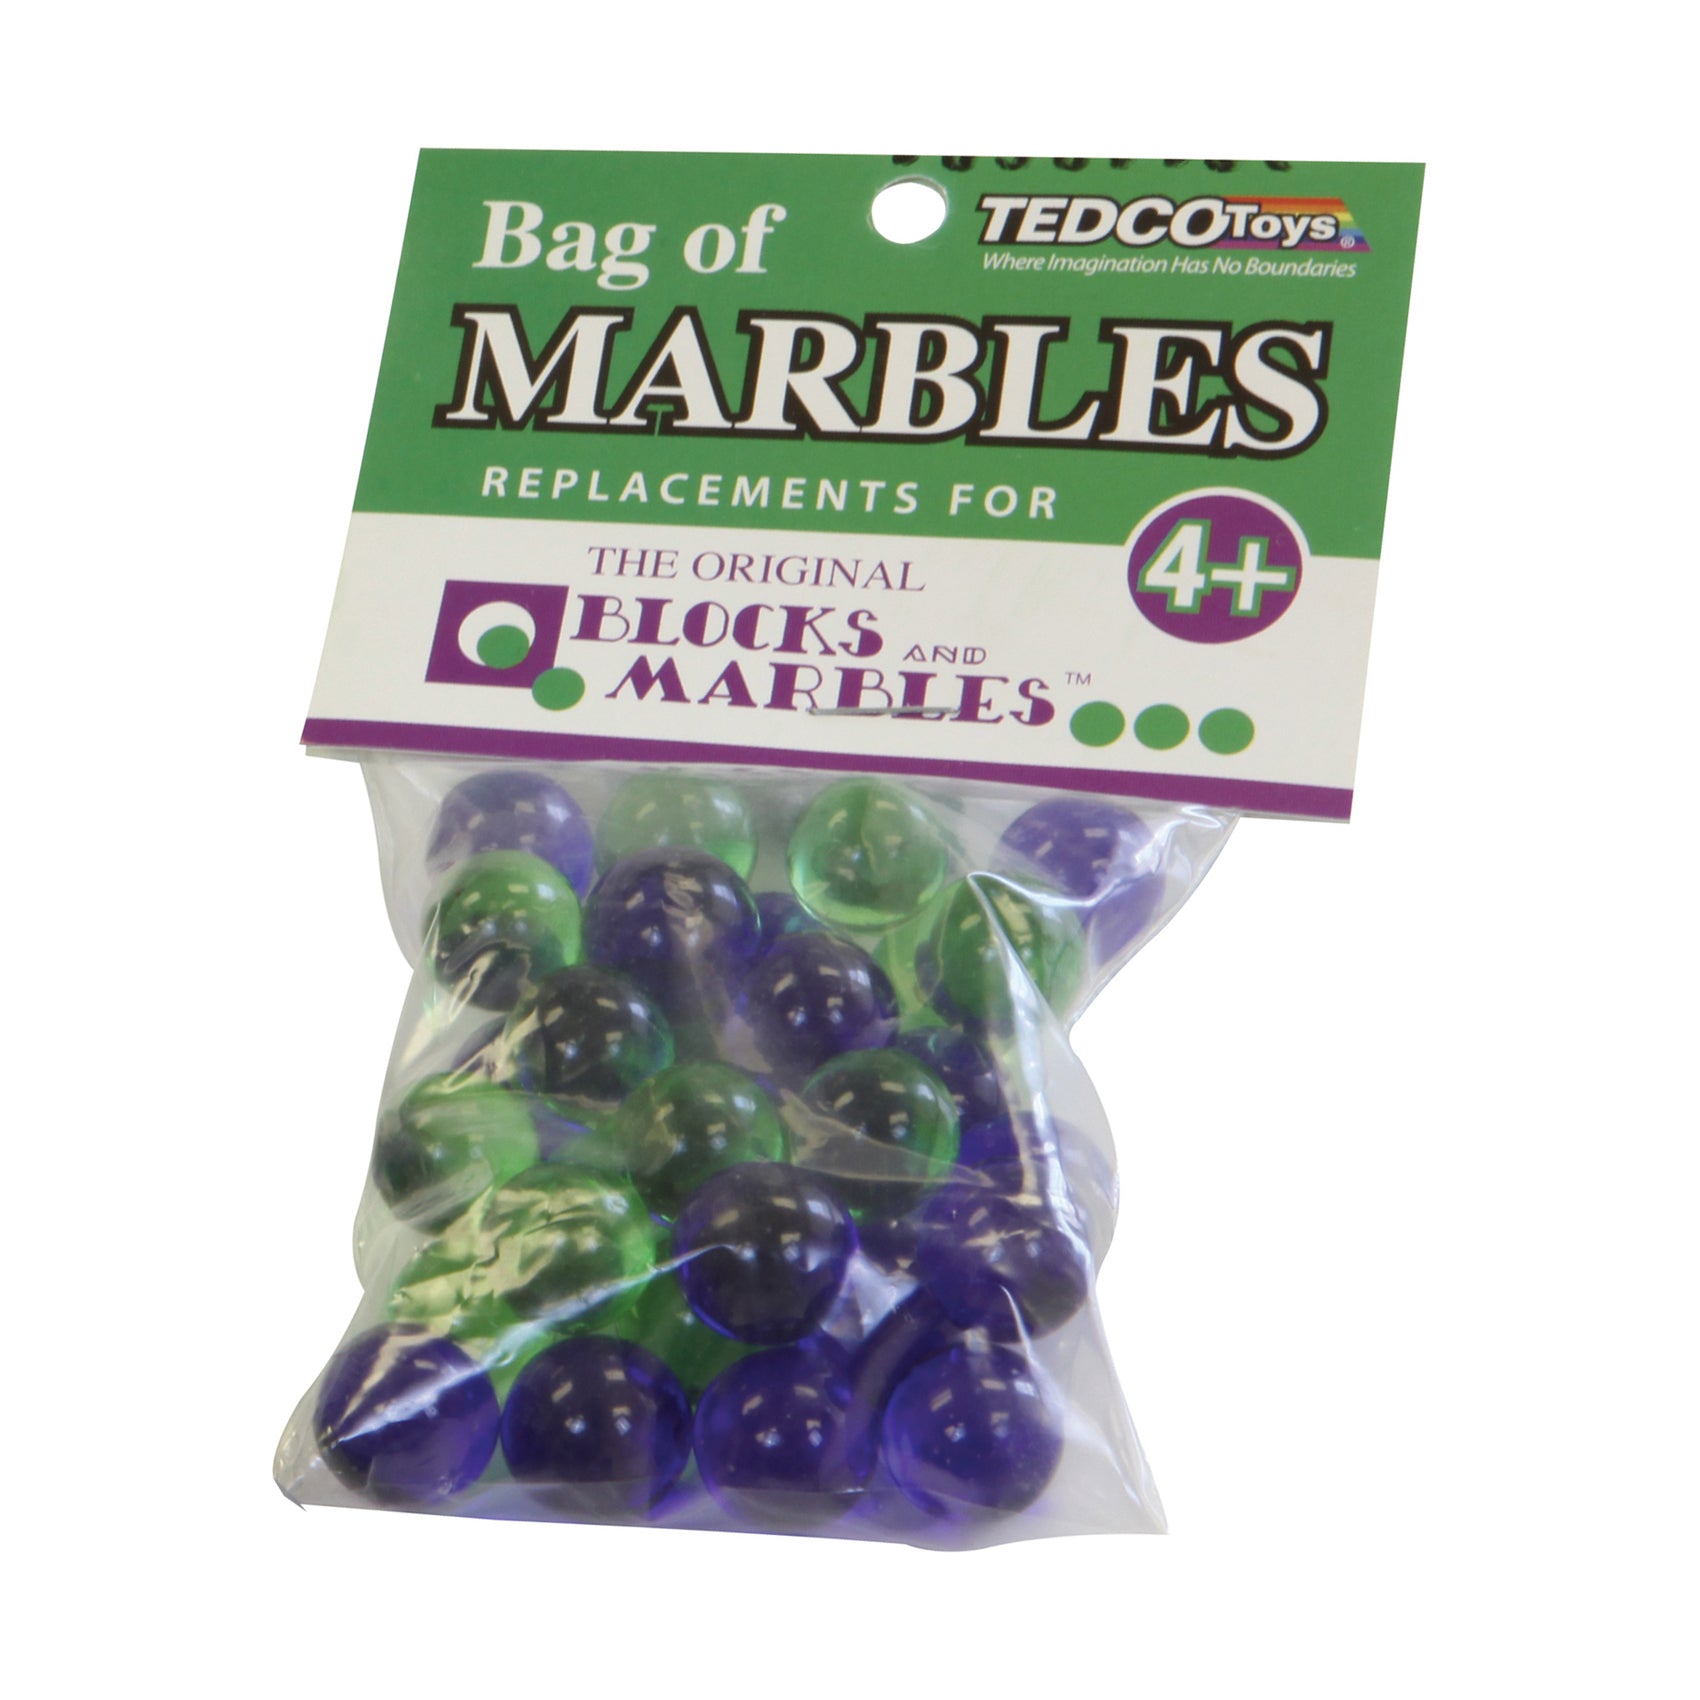 The Original Blocks & Marbles - 30 Replacement Marbles